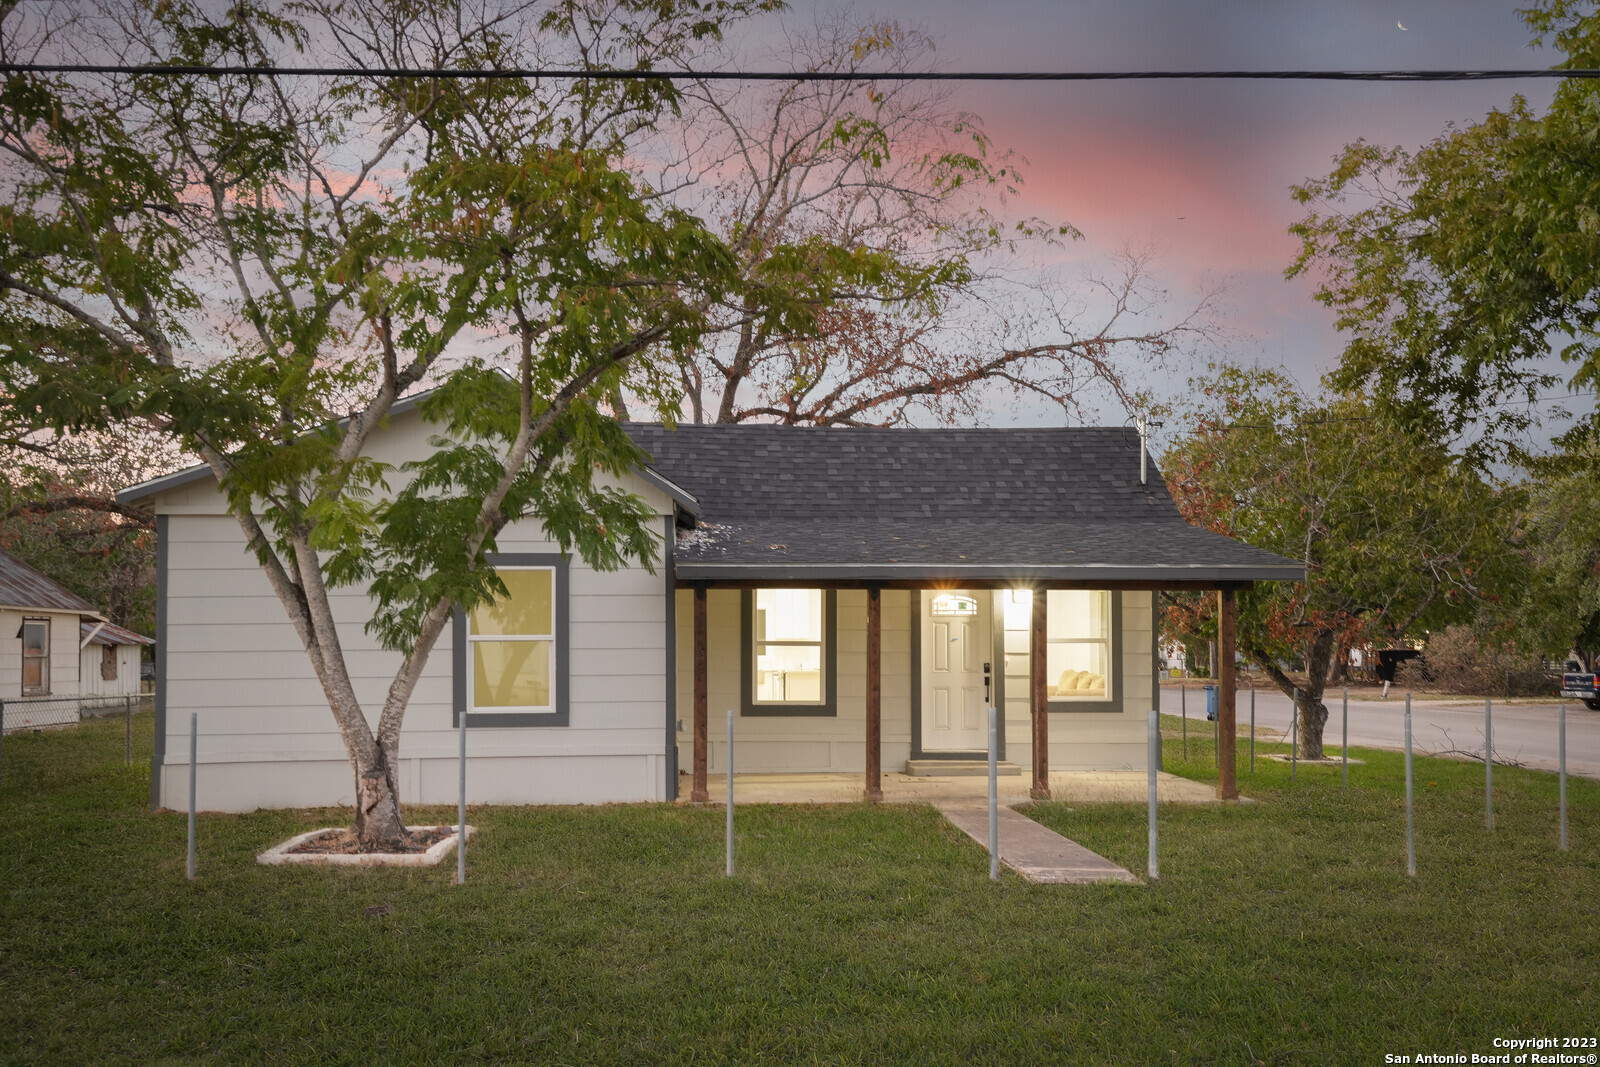 Best Lps House! for sale in New Braunfels, Texas for 2023